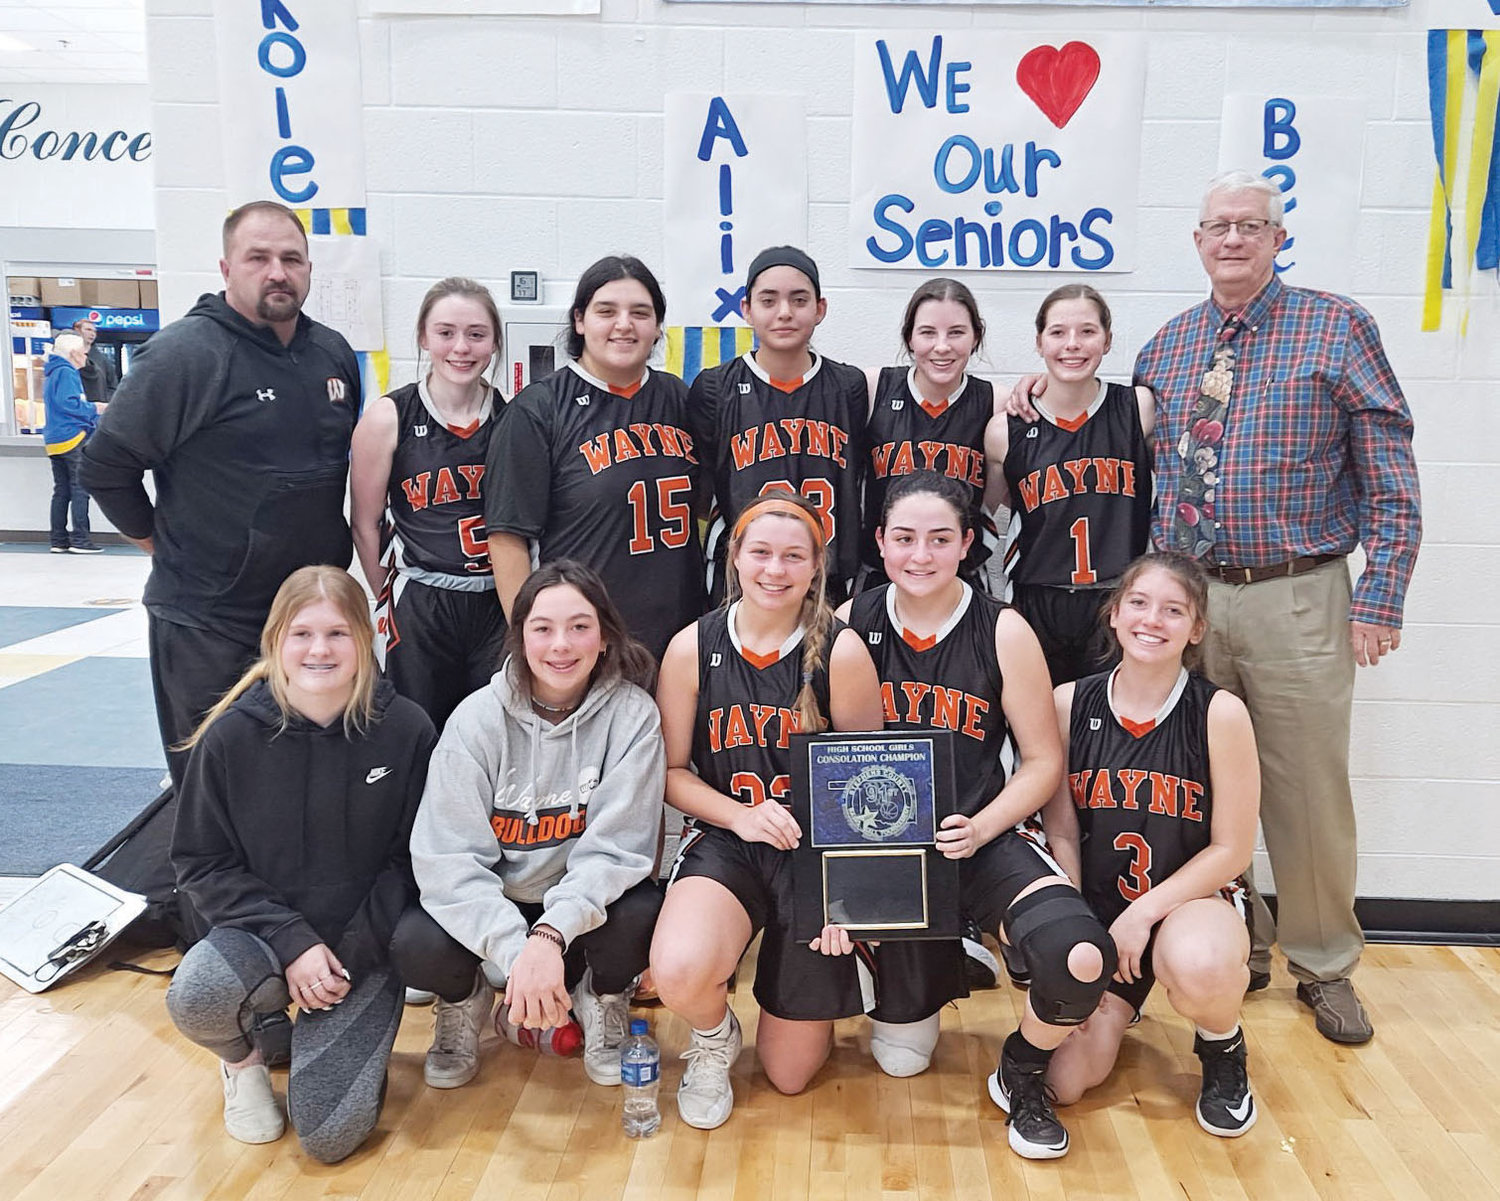 The Wayne Lady Bulldogs beat Empire 35-26 to win the Consolation in the Stephens County tournament last week. Pictured, in front, from left are Madi Self, Faith Brazell, Haiden Parker, Daliyah Fuentes and Jordynn Debaets. In the back, from left, are coach Charles Durrence, McKenzie Fisher, Mayce Trejo, Lorensa Martinez, Kaylee Madden, Haylee Durrence and head coach Bill Burnett. Full story on page 2B.